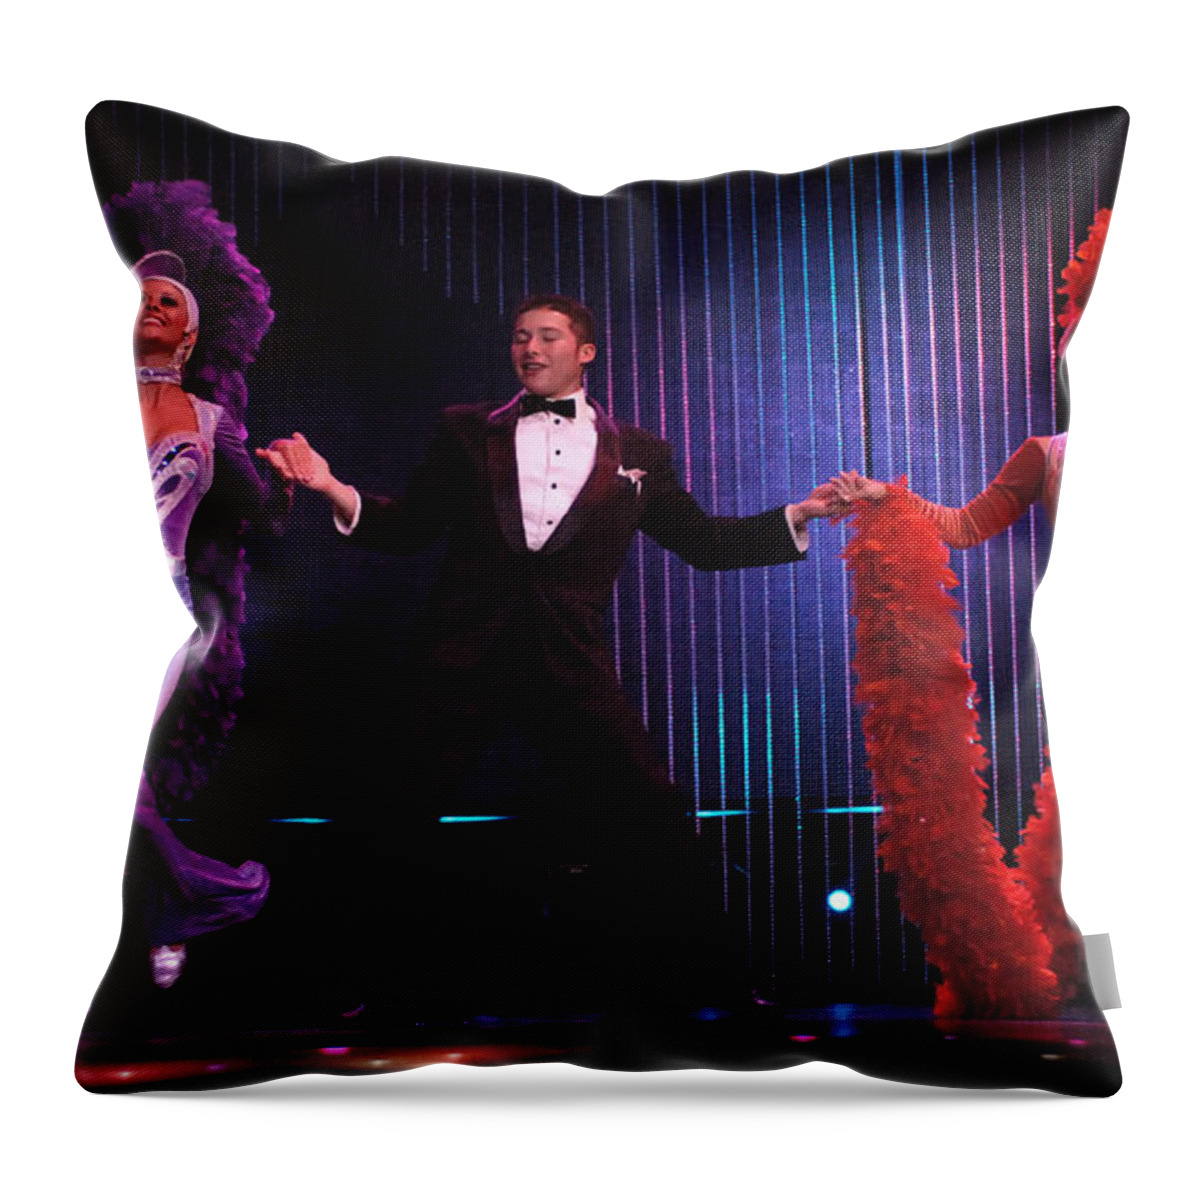  Dance Throw Pillow featuring the photograph Putting On The Glitz by Bob Christopher